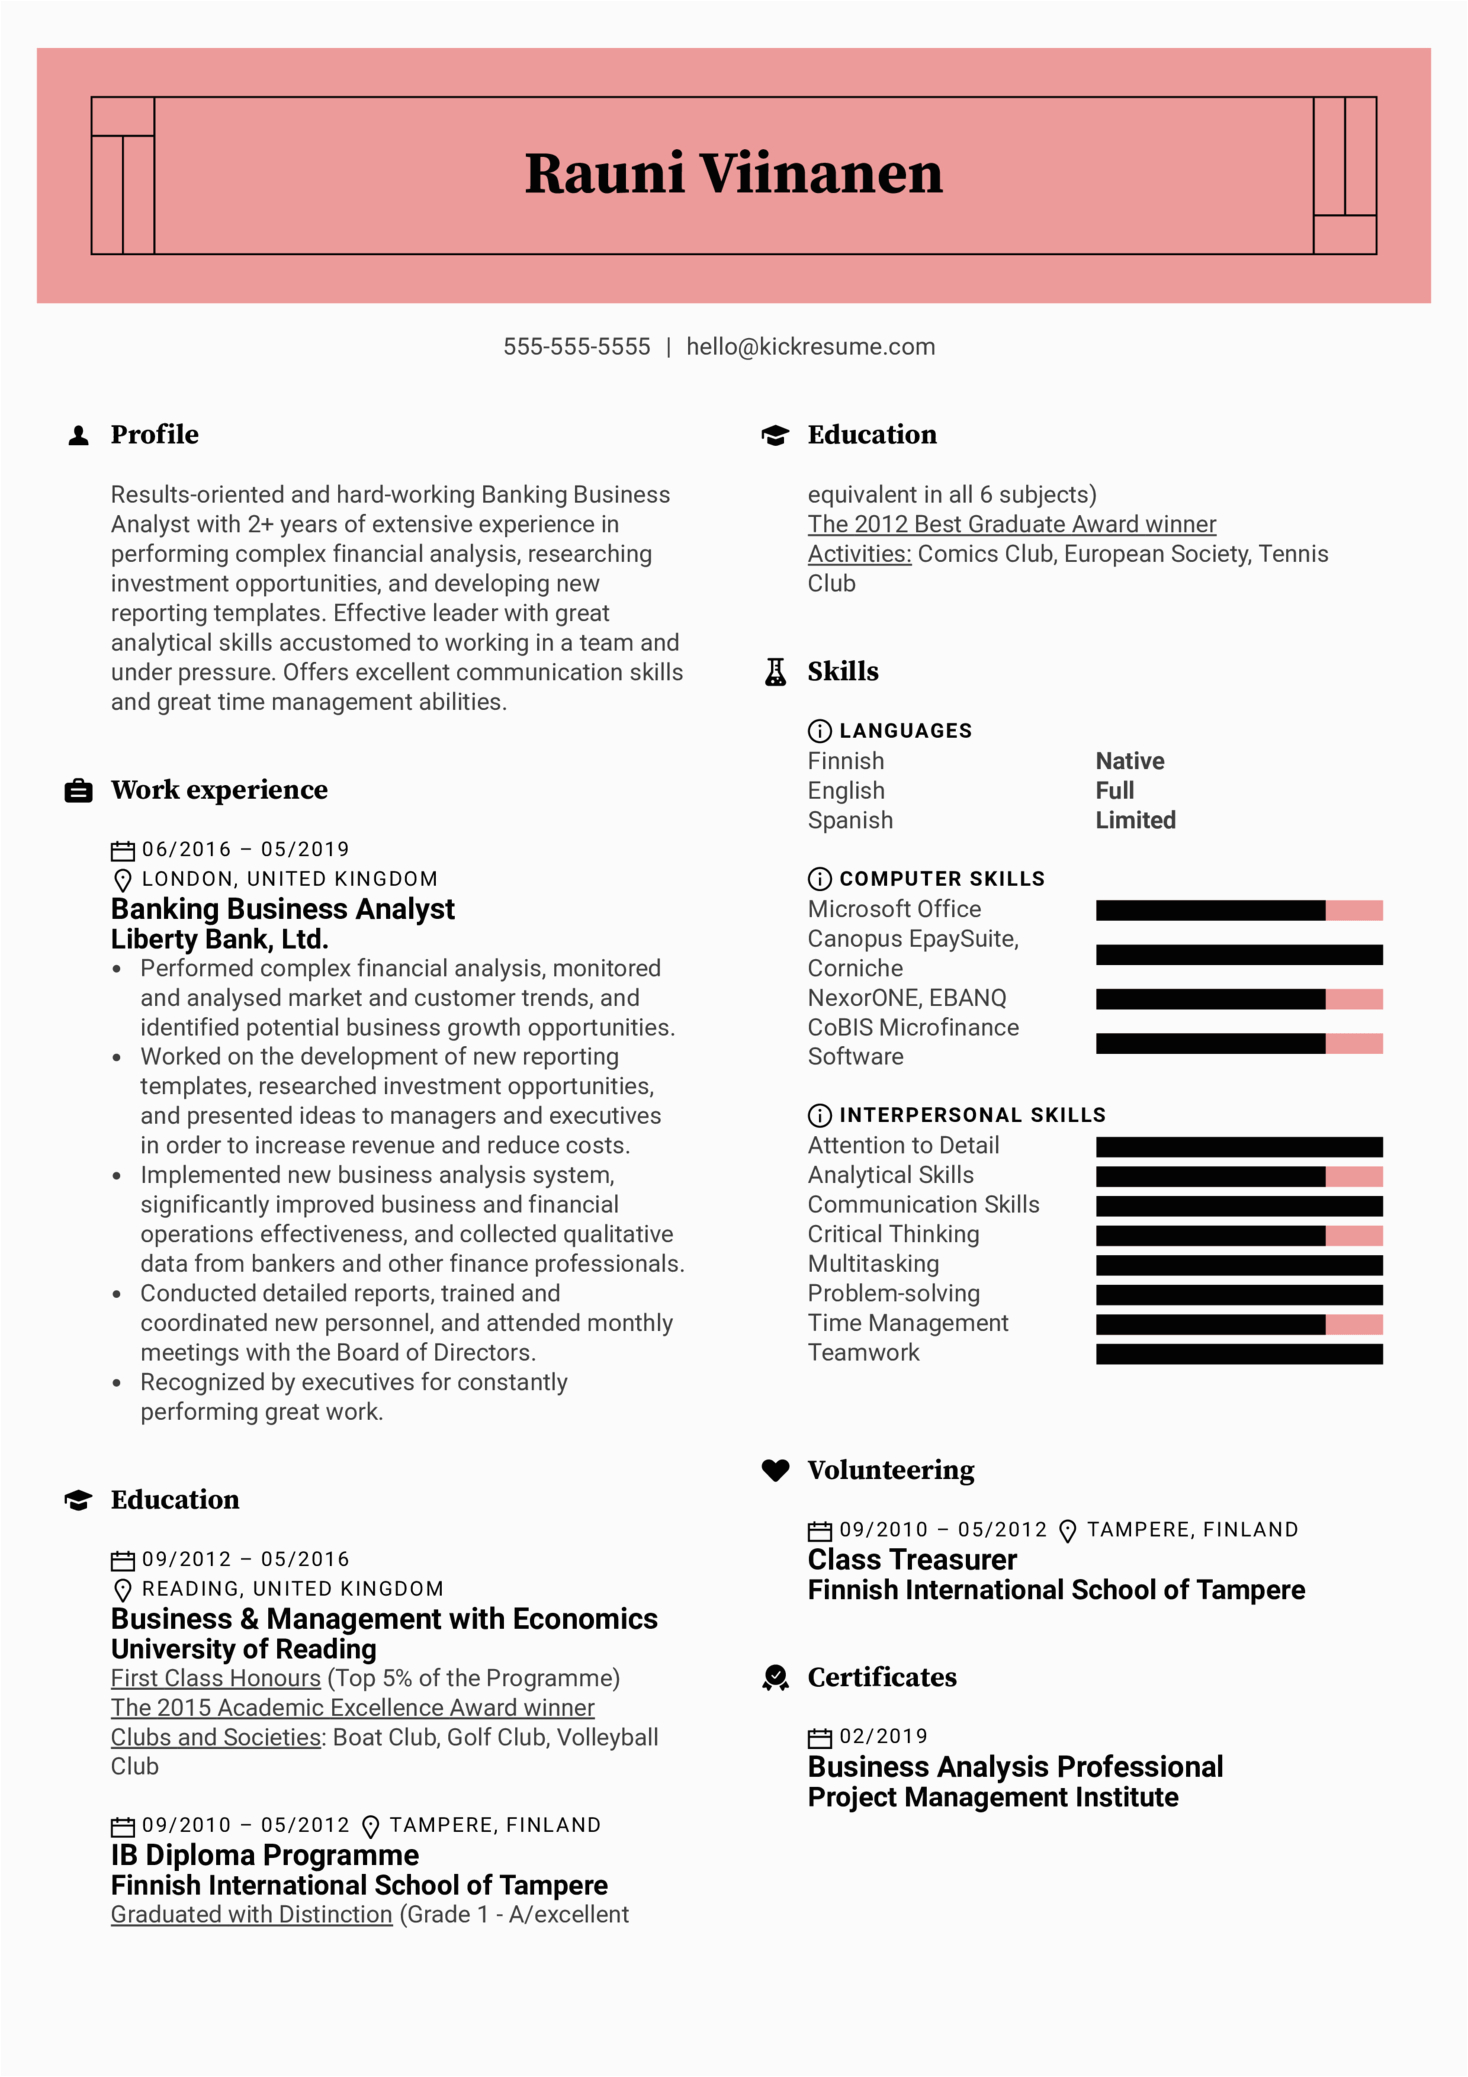 Sample Resume for Experienced Business Analyst Banking Business Analyst Resume Sample